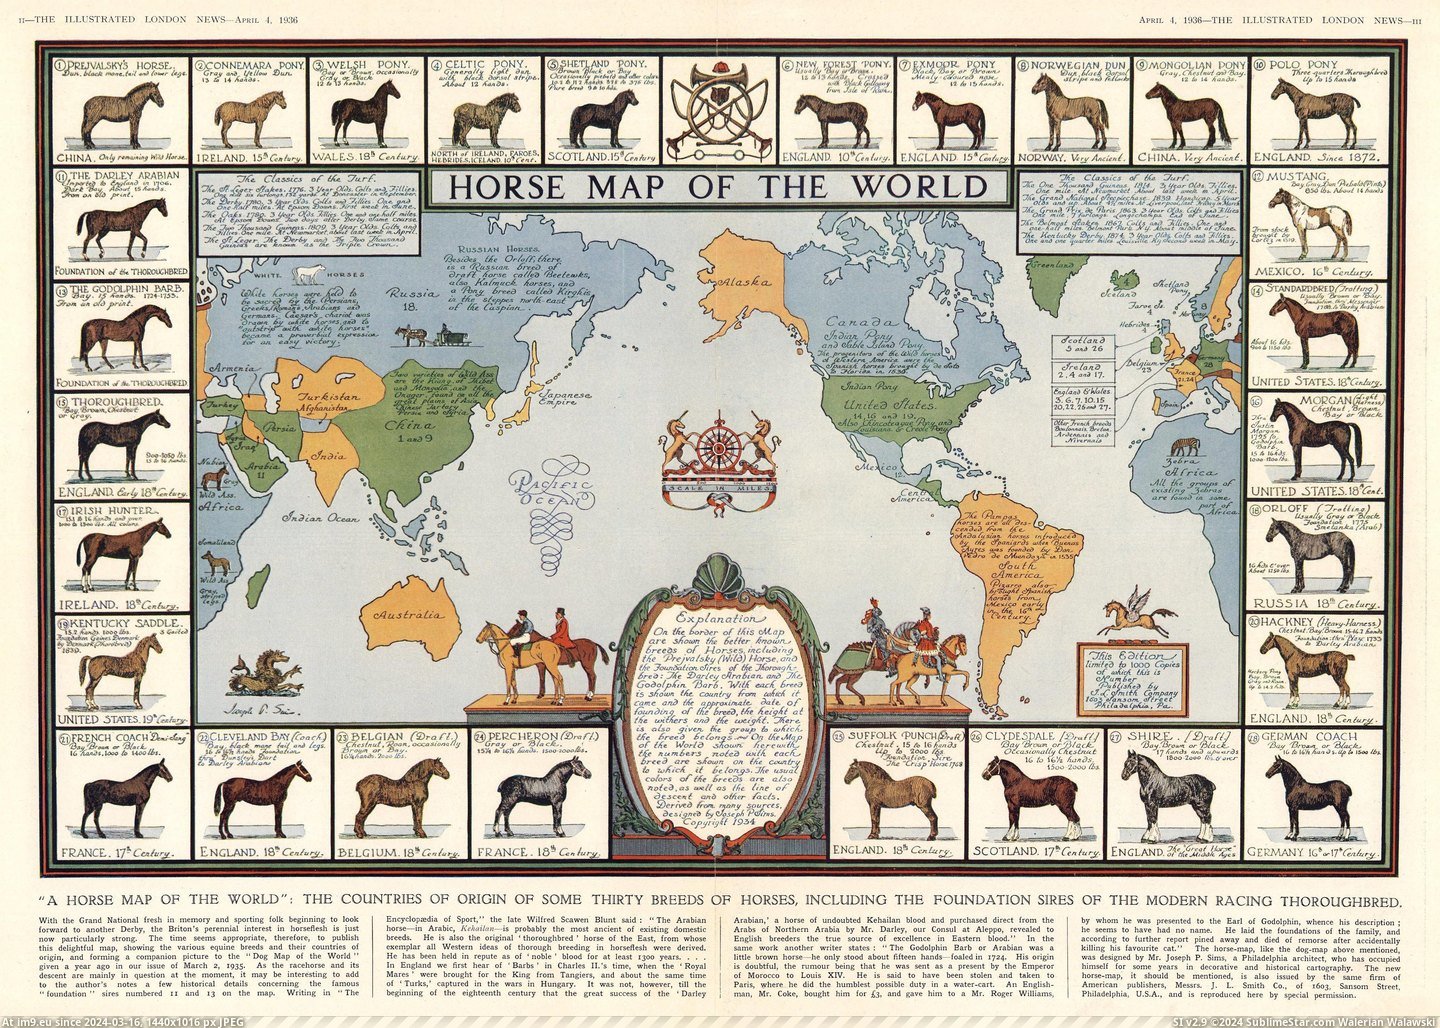 #World #Map #Countries #Origin #Foundation #Breeds #Horse #Including #Horses [Mapporn] Horse Map of the World: The countries of origin of some thirty breeds of horses, including the foundation sires of the Pic. (Image of album My r/MAPS favs))